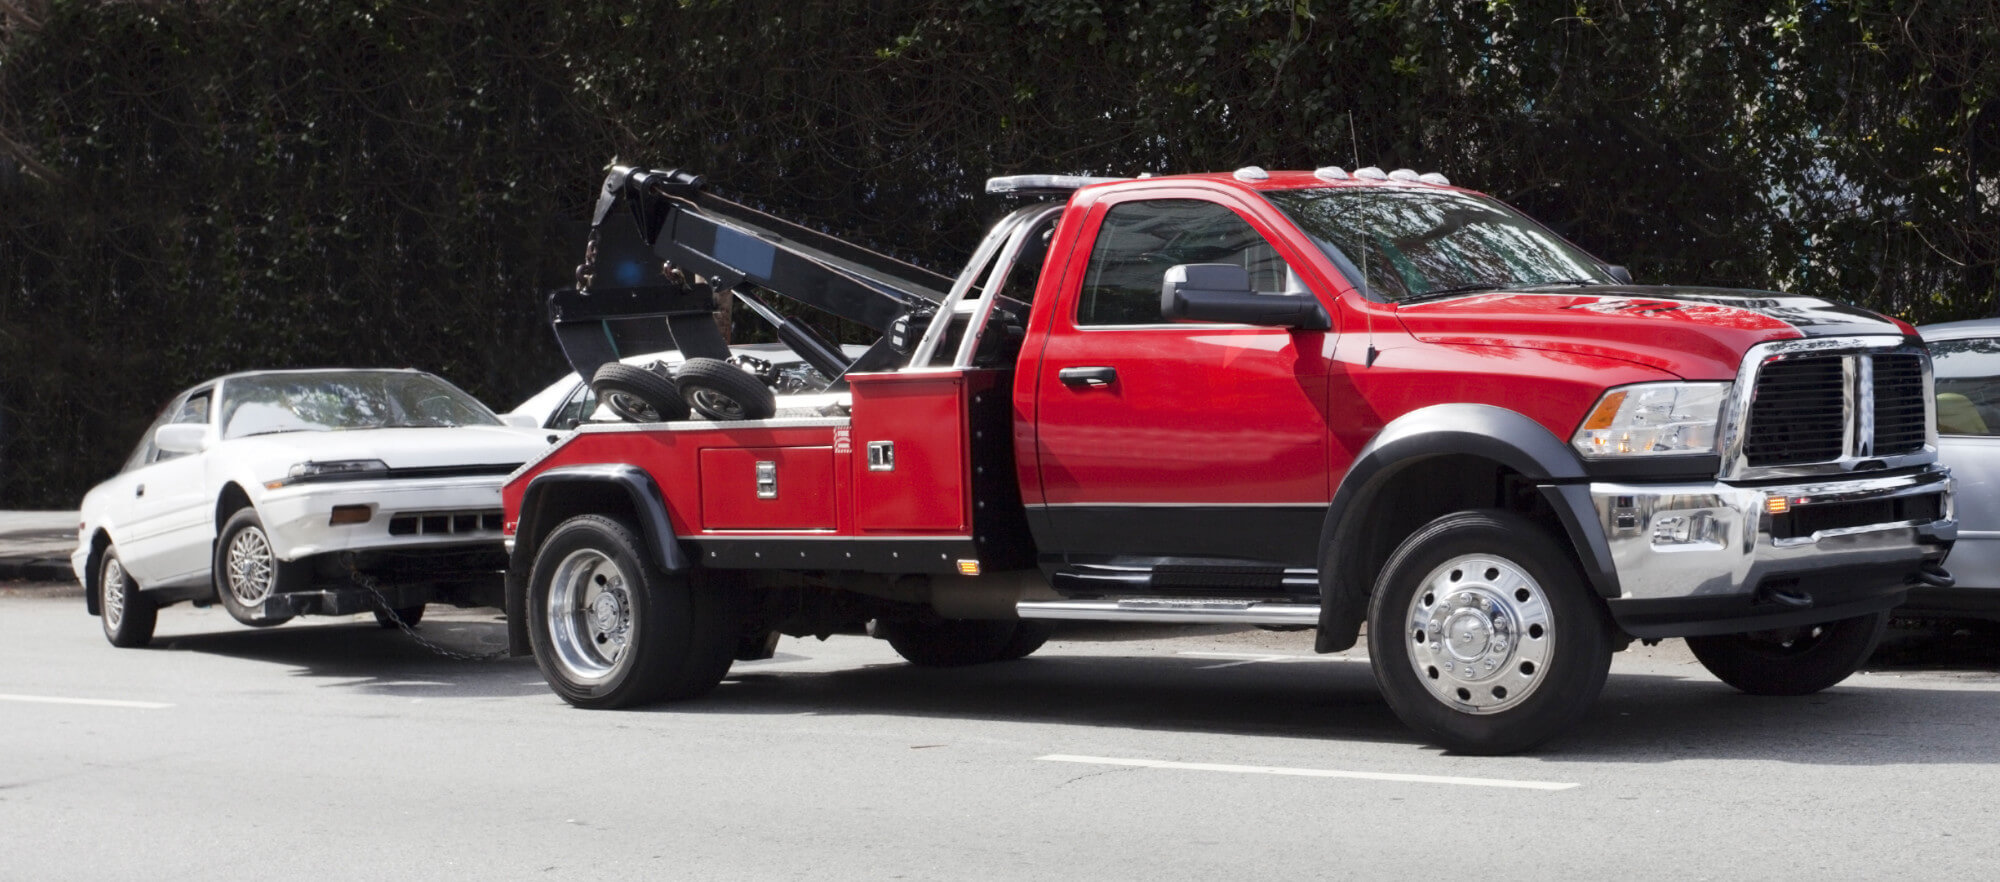 The Benefits of Regularly Maintaining Your Towing Equipment